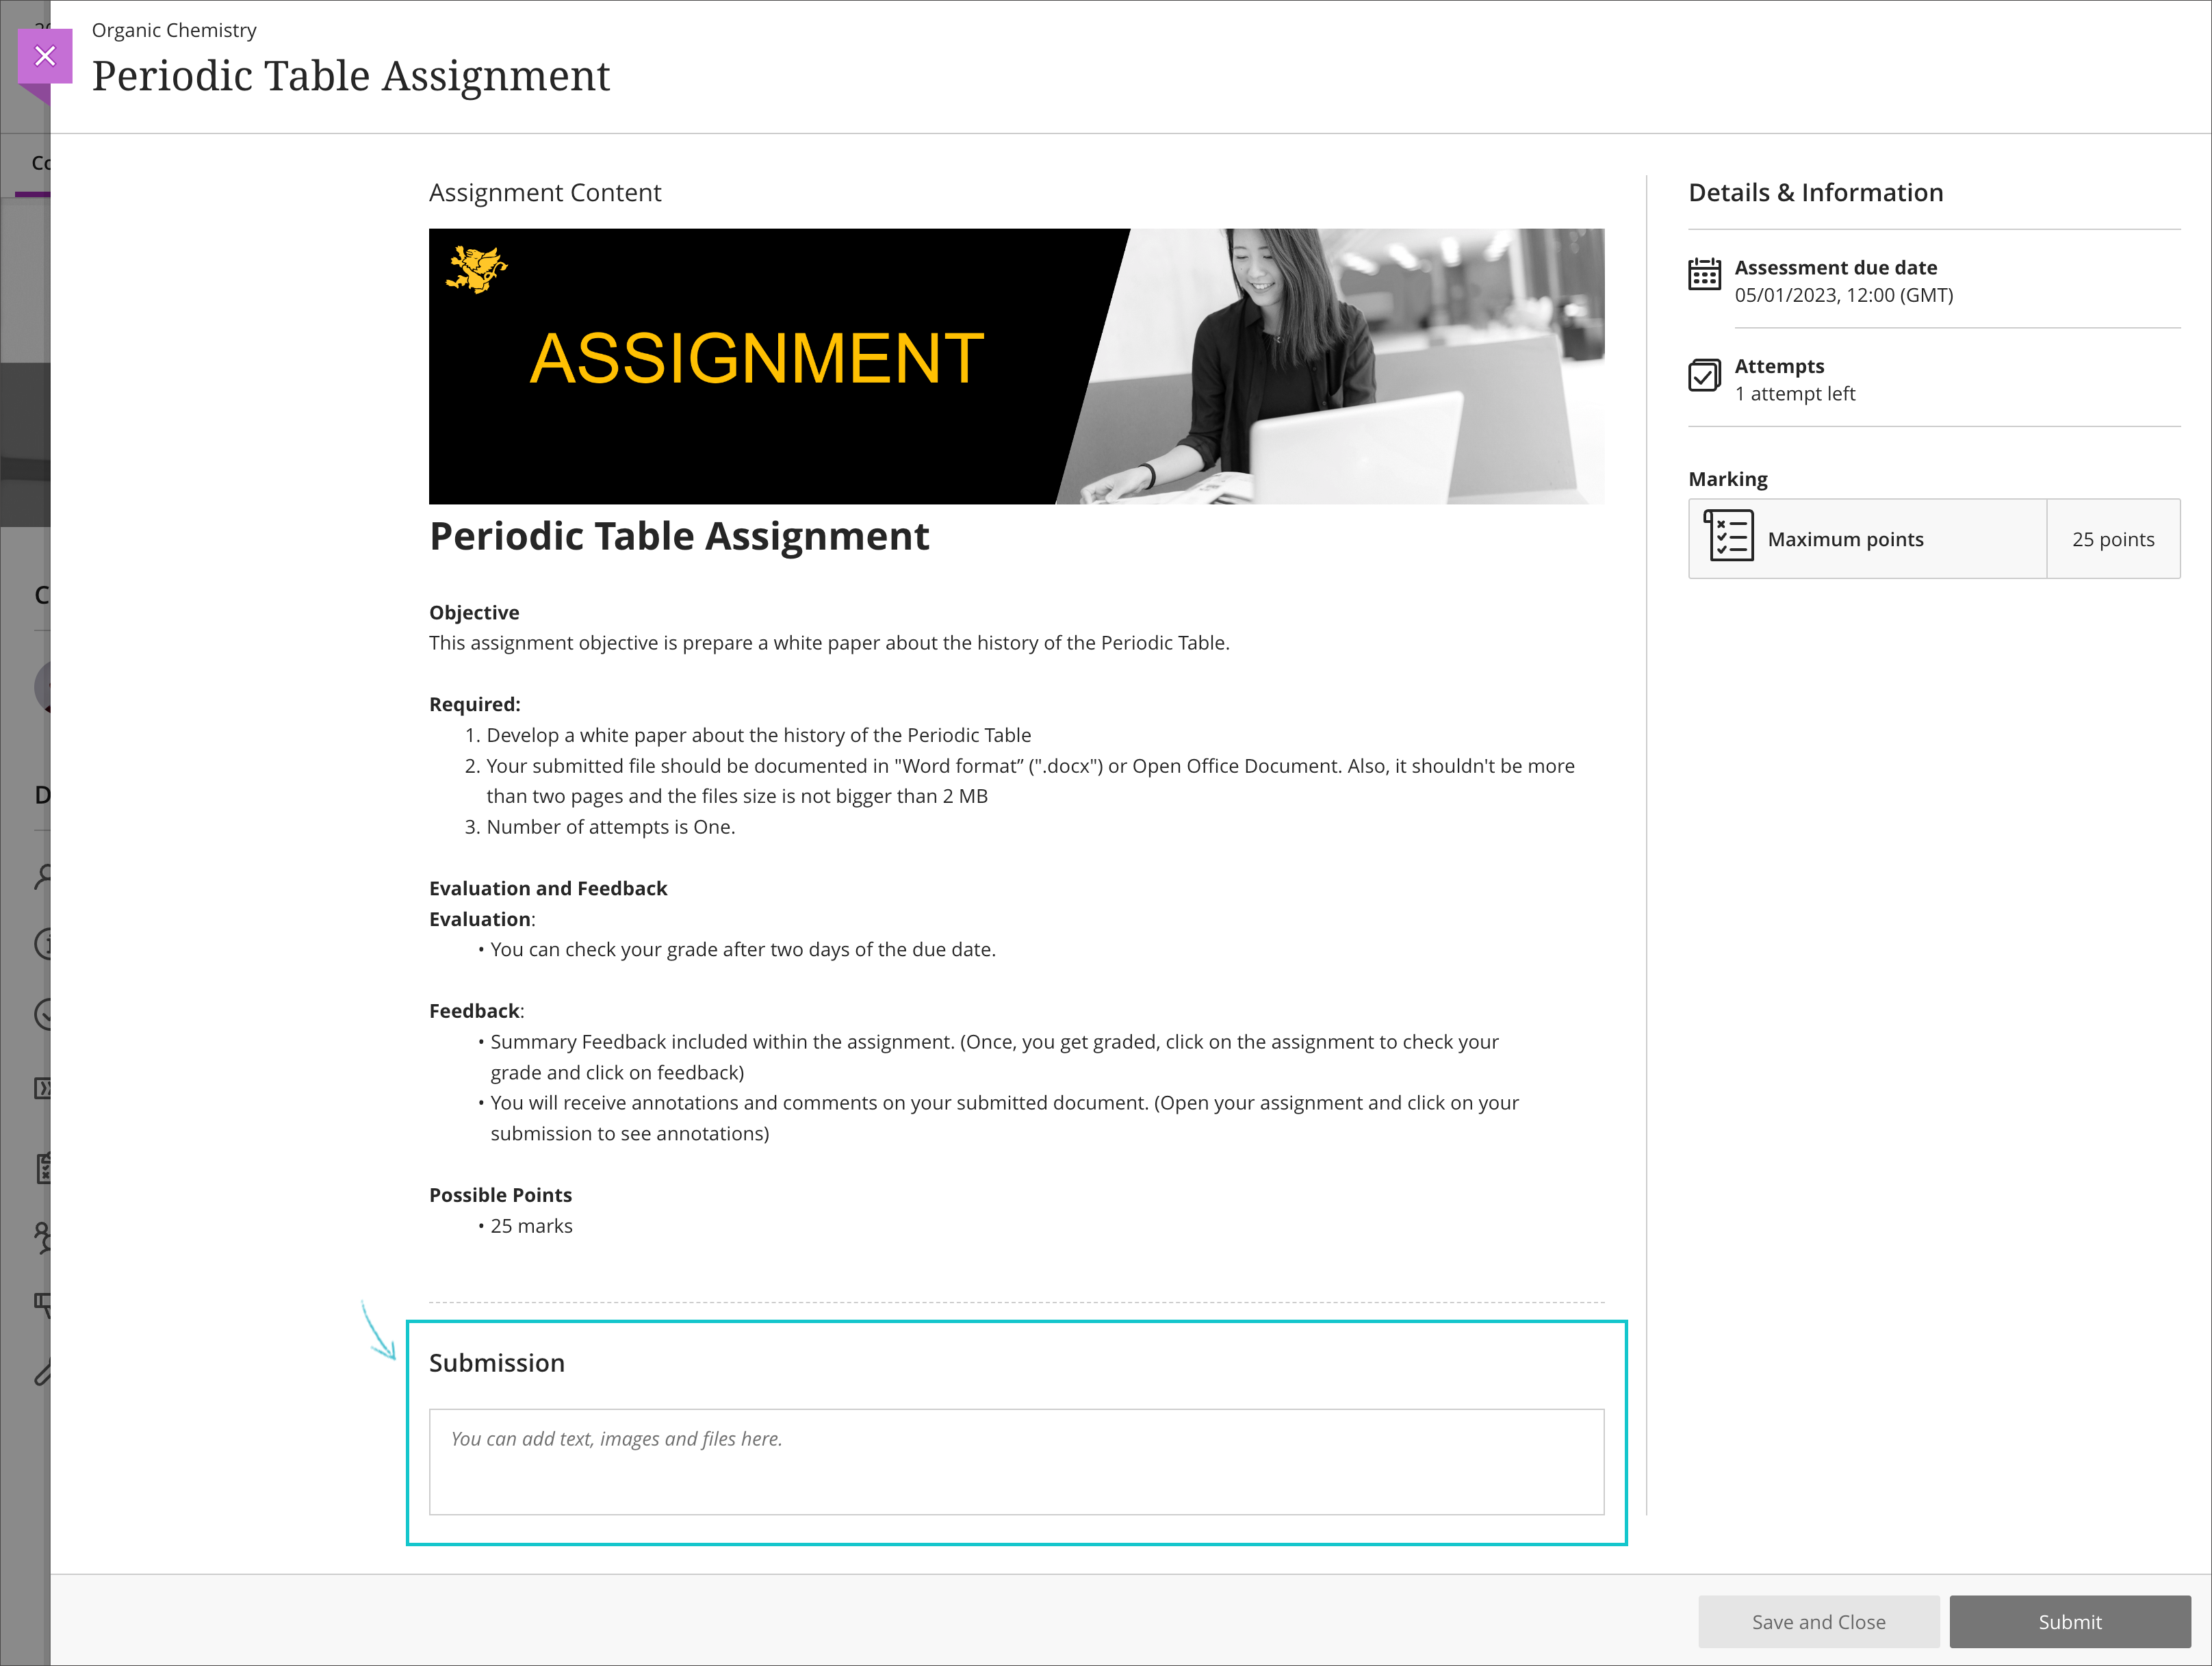 Submit an Assignment Screen in Ultra